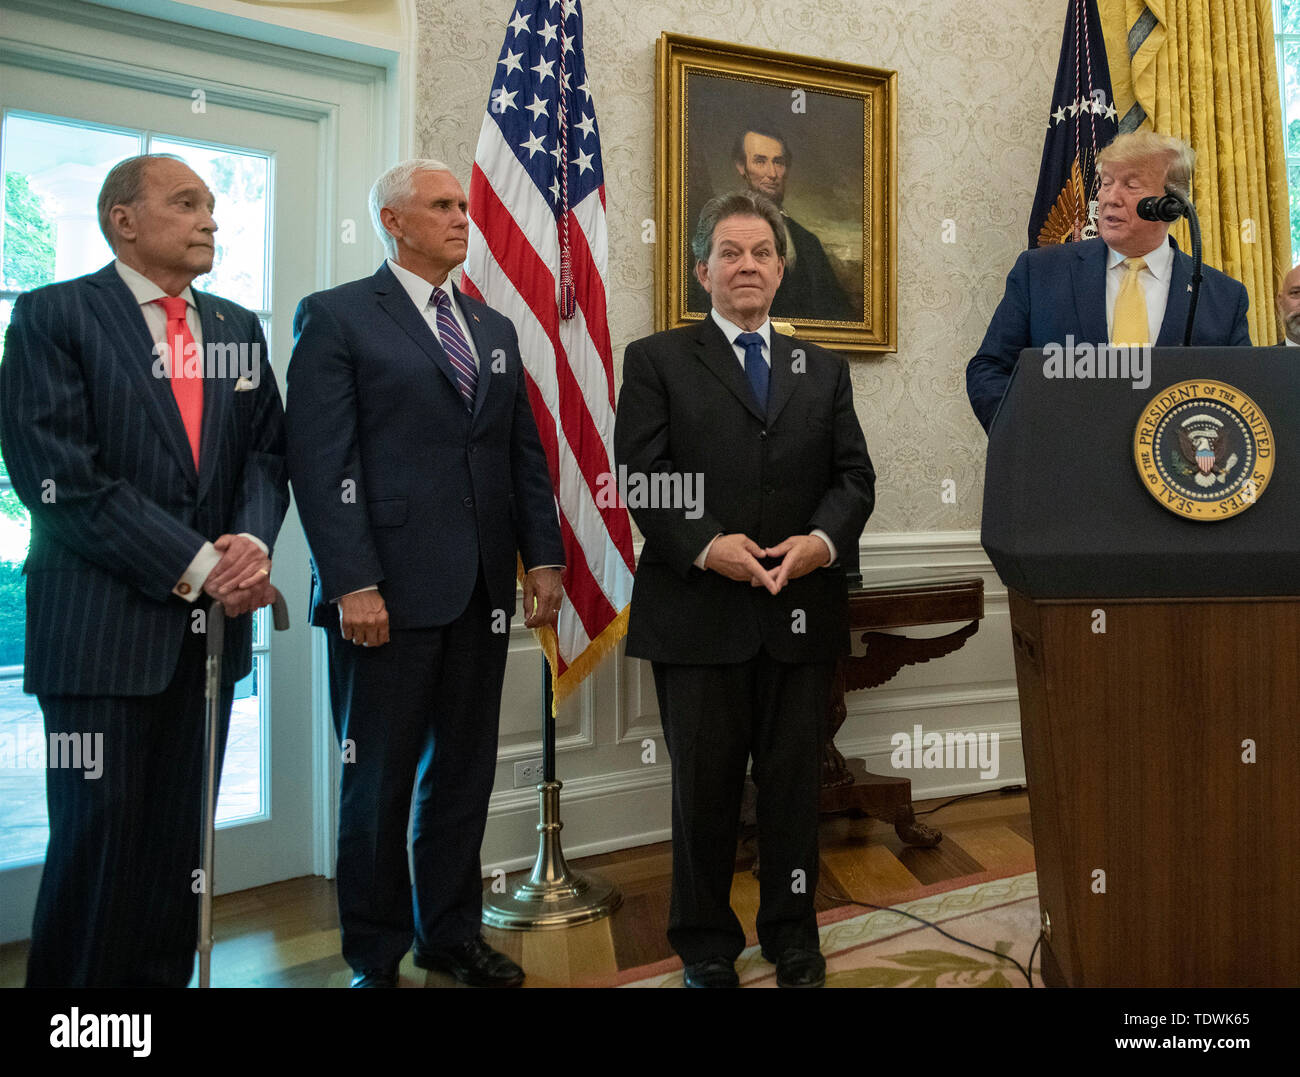 United States President Donald J. Trump, right, makes remarks prior to presenting the Presidential Medal of Freedom to Arthur Laffer, left, in the Oval Office of the White House in Washington, DC on Wednesday, June 19, 2019. Laffer the originated the 'Laffer Curve' that seemingly shows the more taxes are cut, the more economic activity there is, and that increase offsets the effects of the tax cut. Pictured from left to right: Director of the National Economic Council Larry Kudlow, US Vice President Mike Pence, Laffer, and President Trump. Credit: Ron Sachs/Pool via CNP | usage worldwide Stock Photo